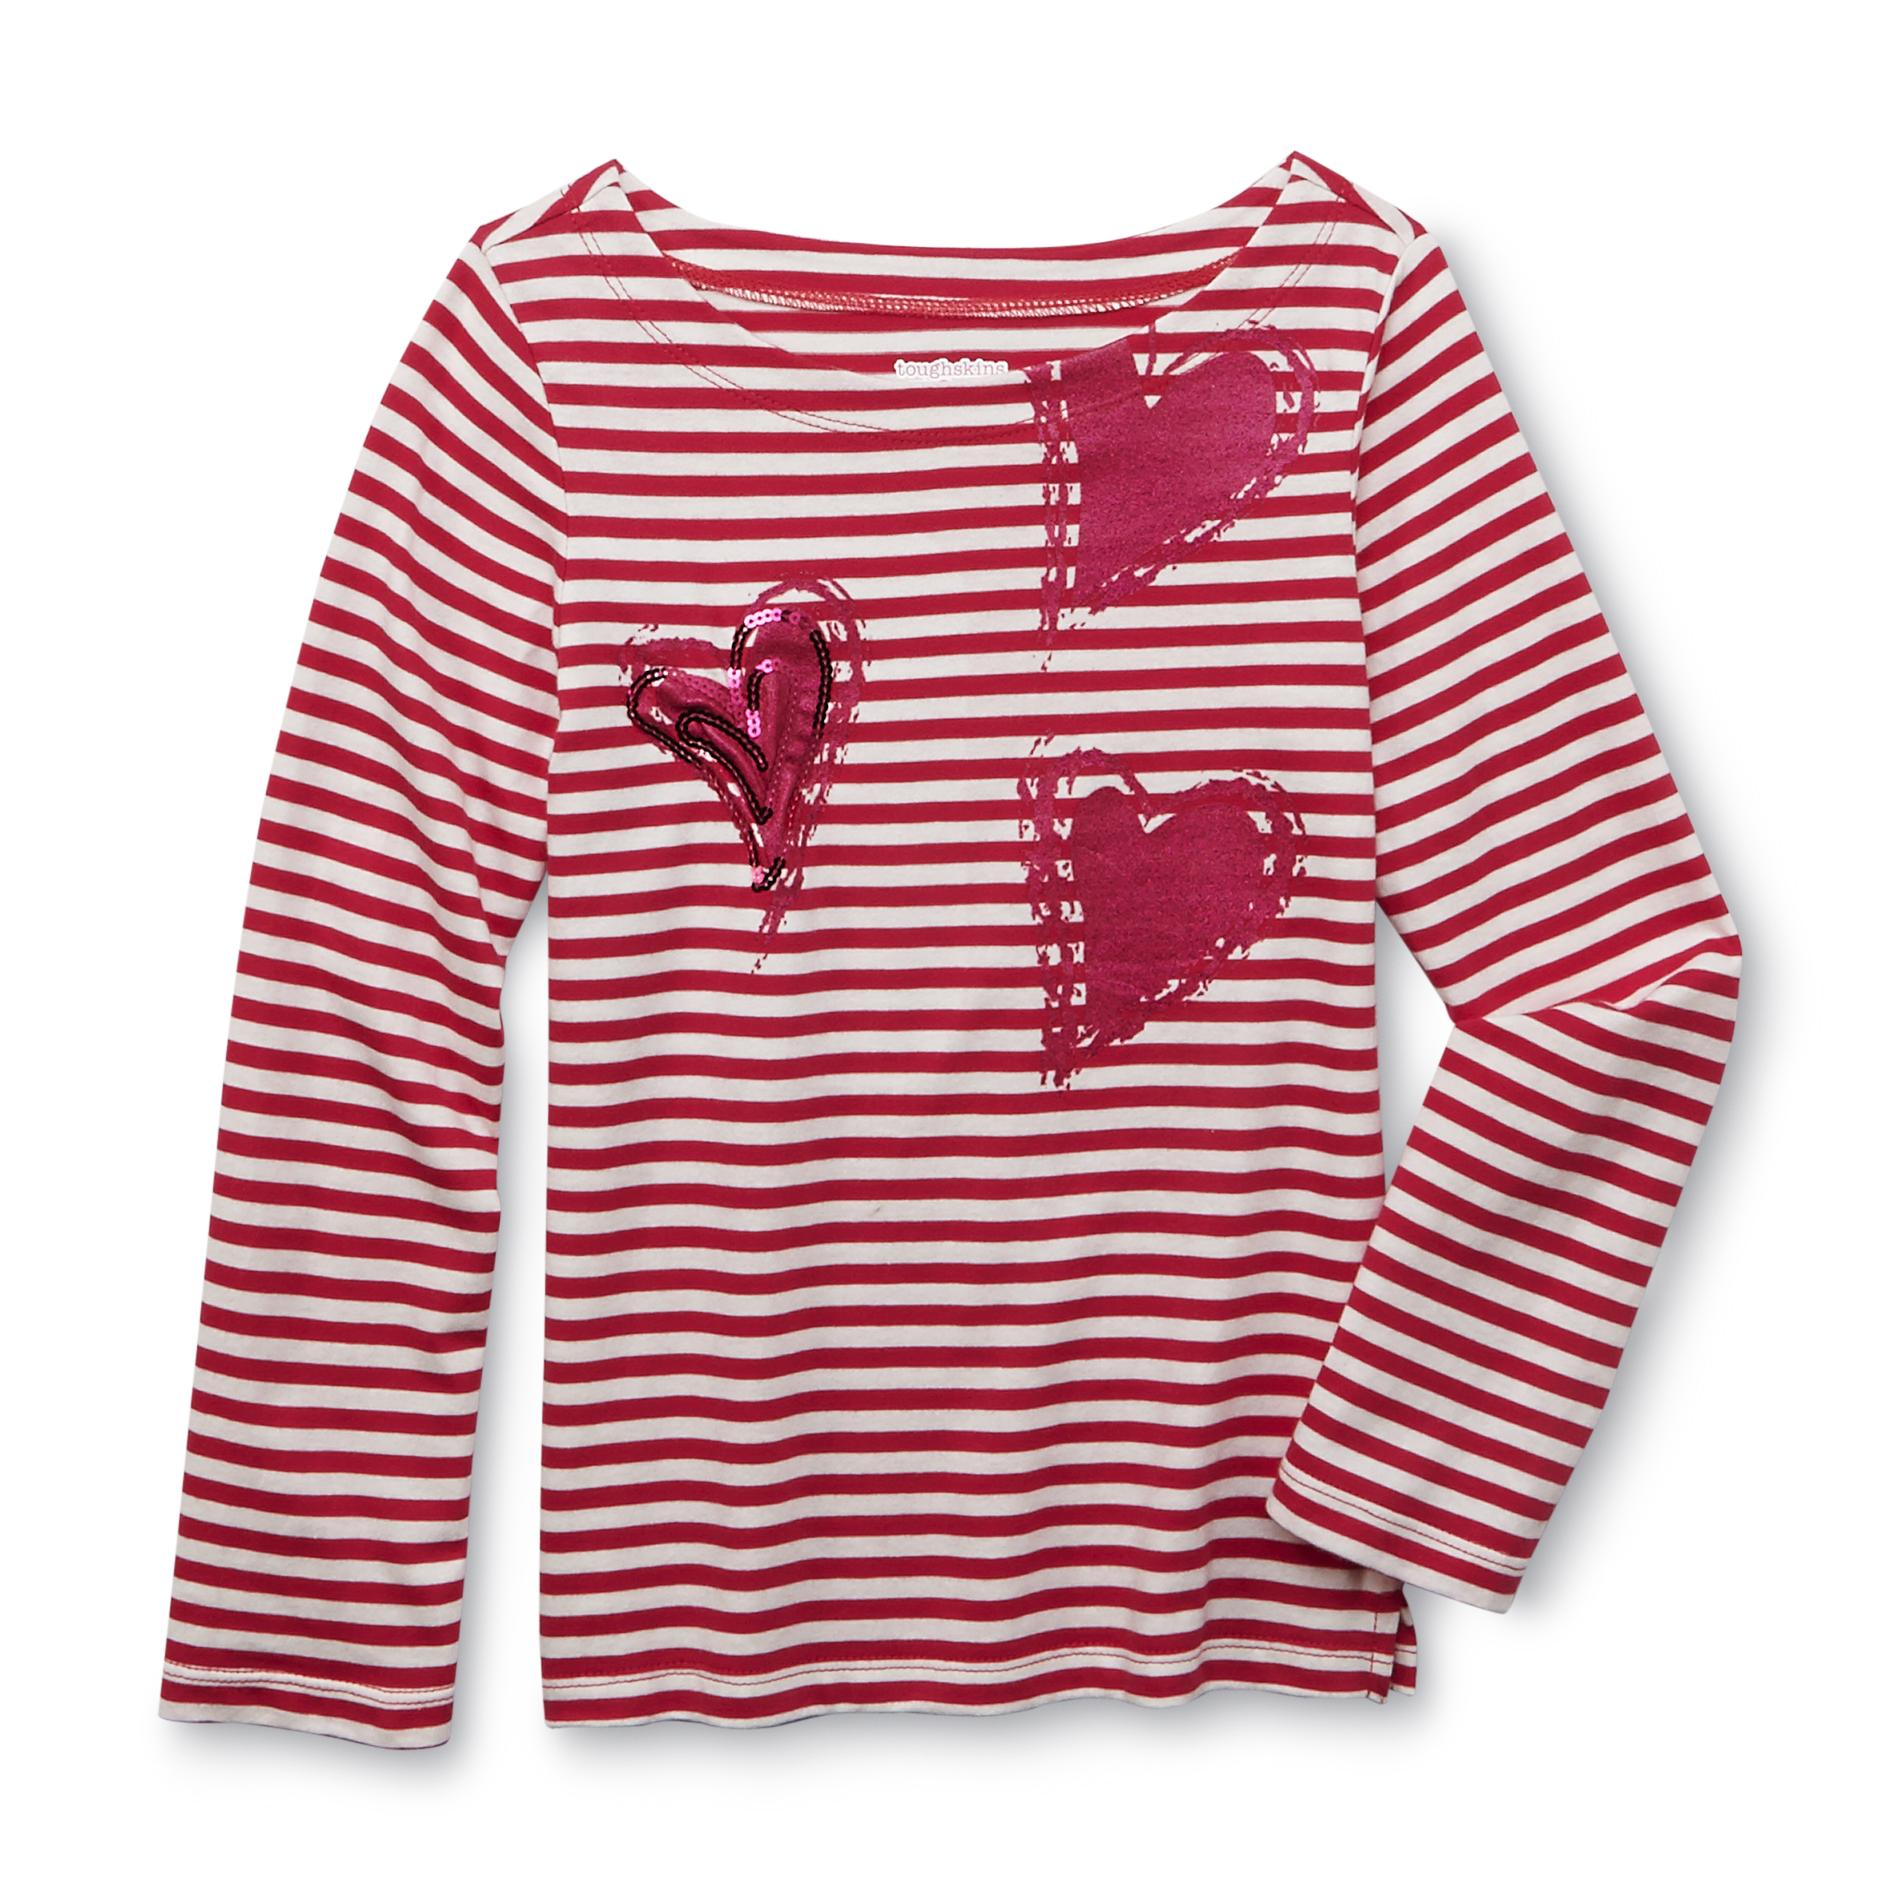 Toughskins Girl's Striped Top - Hearts